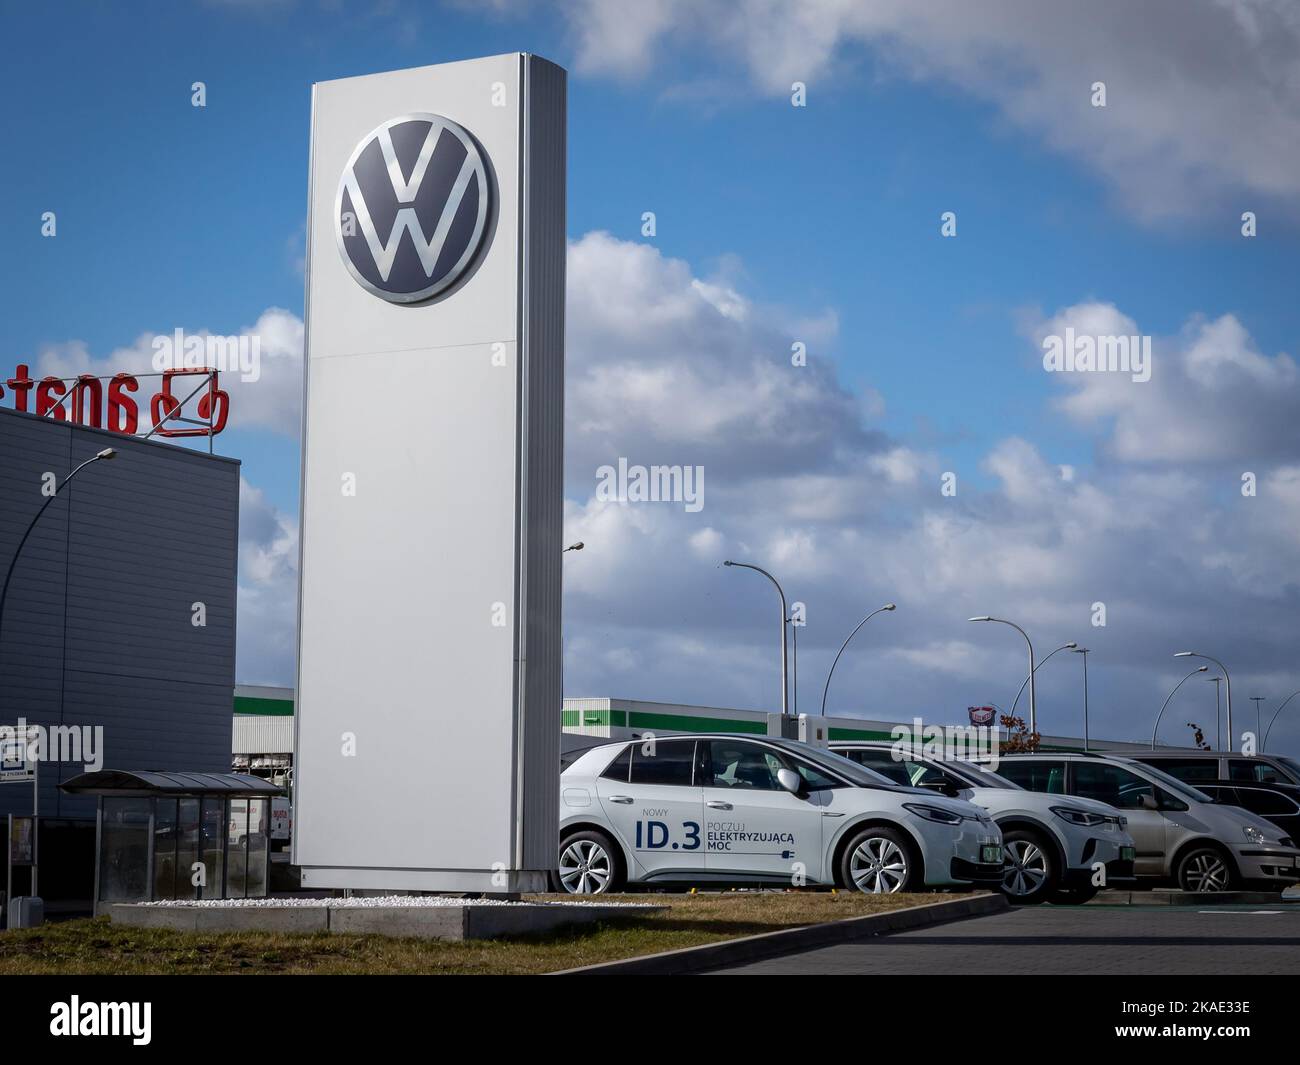 Wroclaw, Poland - February 19, 2022: Closeup of a column with an emblem of Volkswagen Group company. No people, cloudy sky. Stock Photo